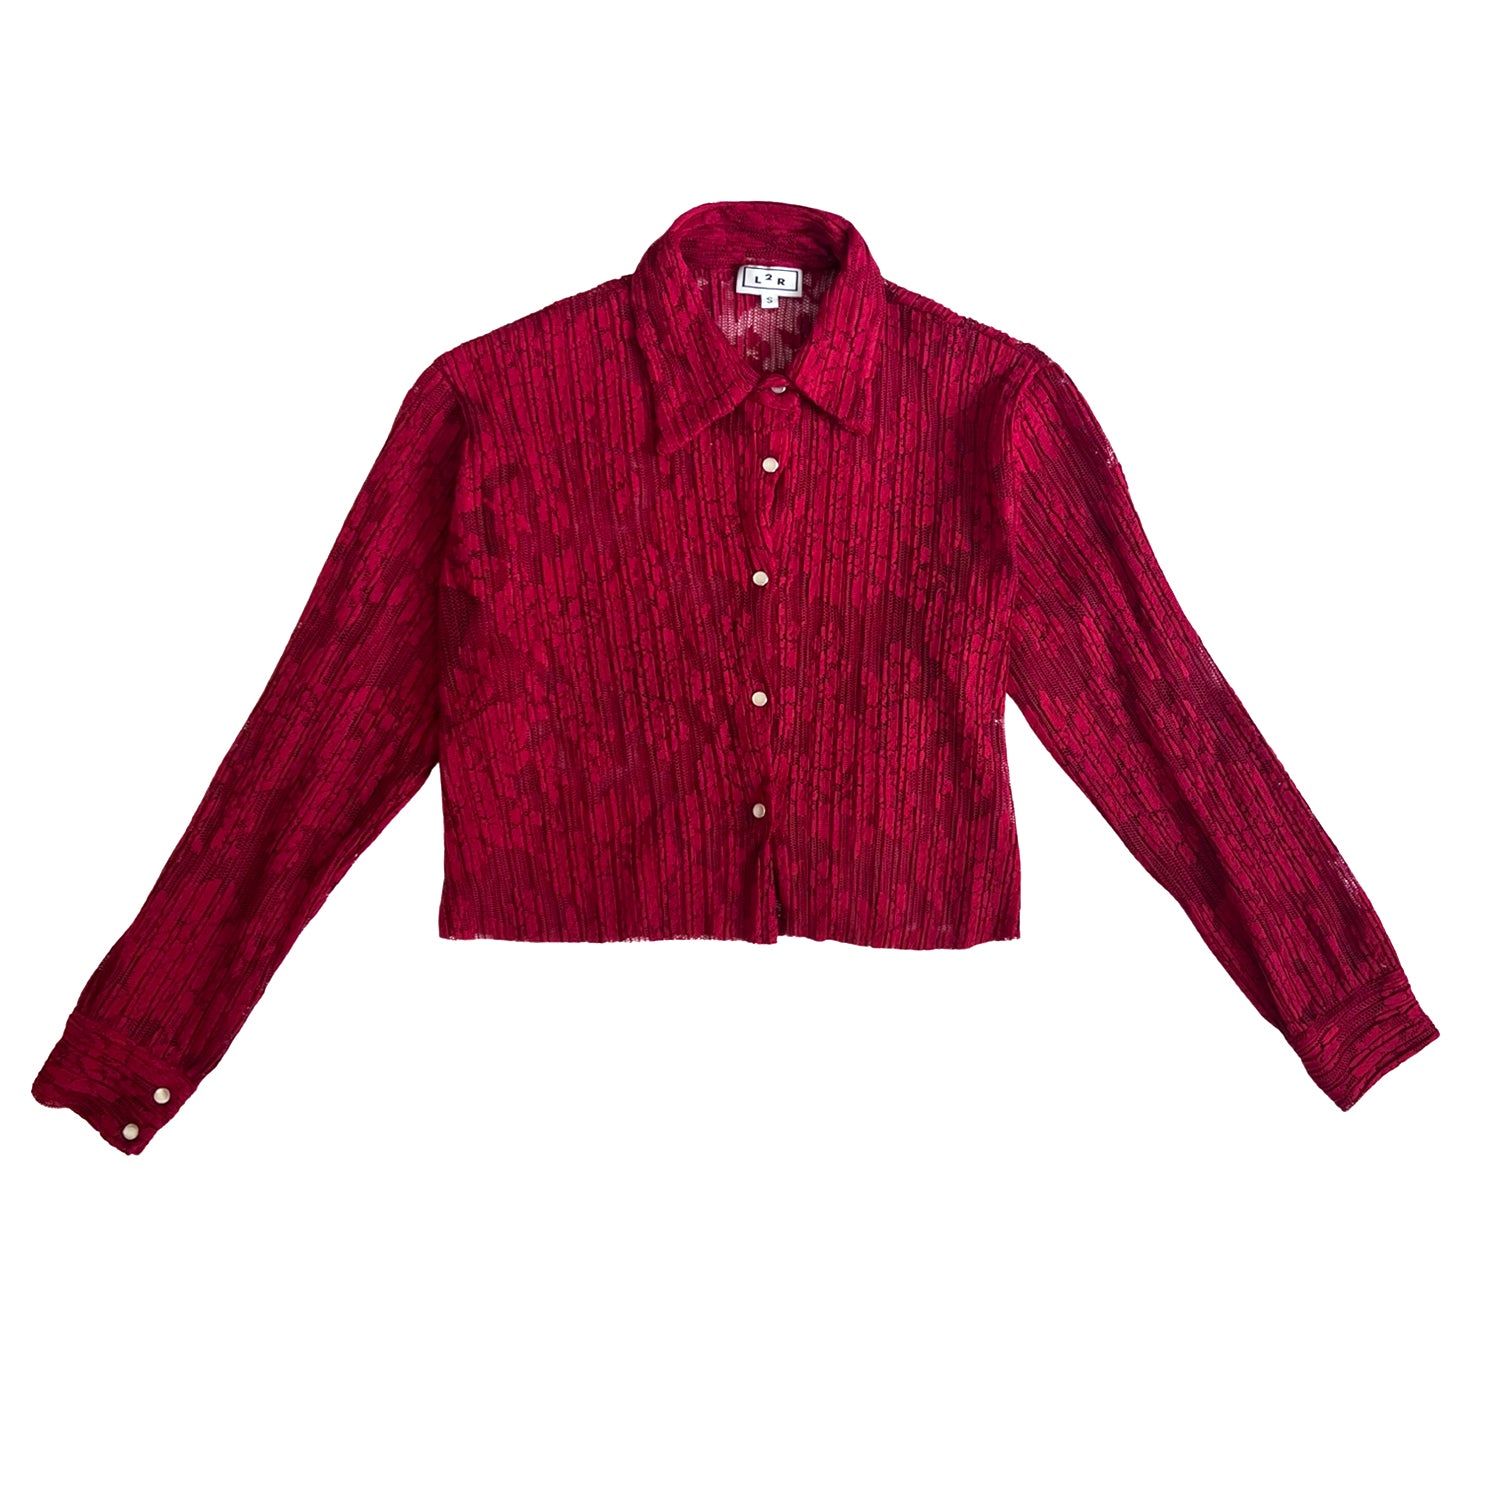 Cropped Pleated Shirt in Red Lace